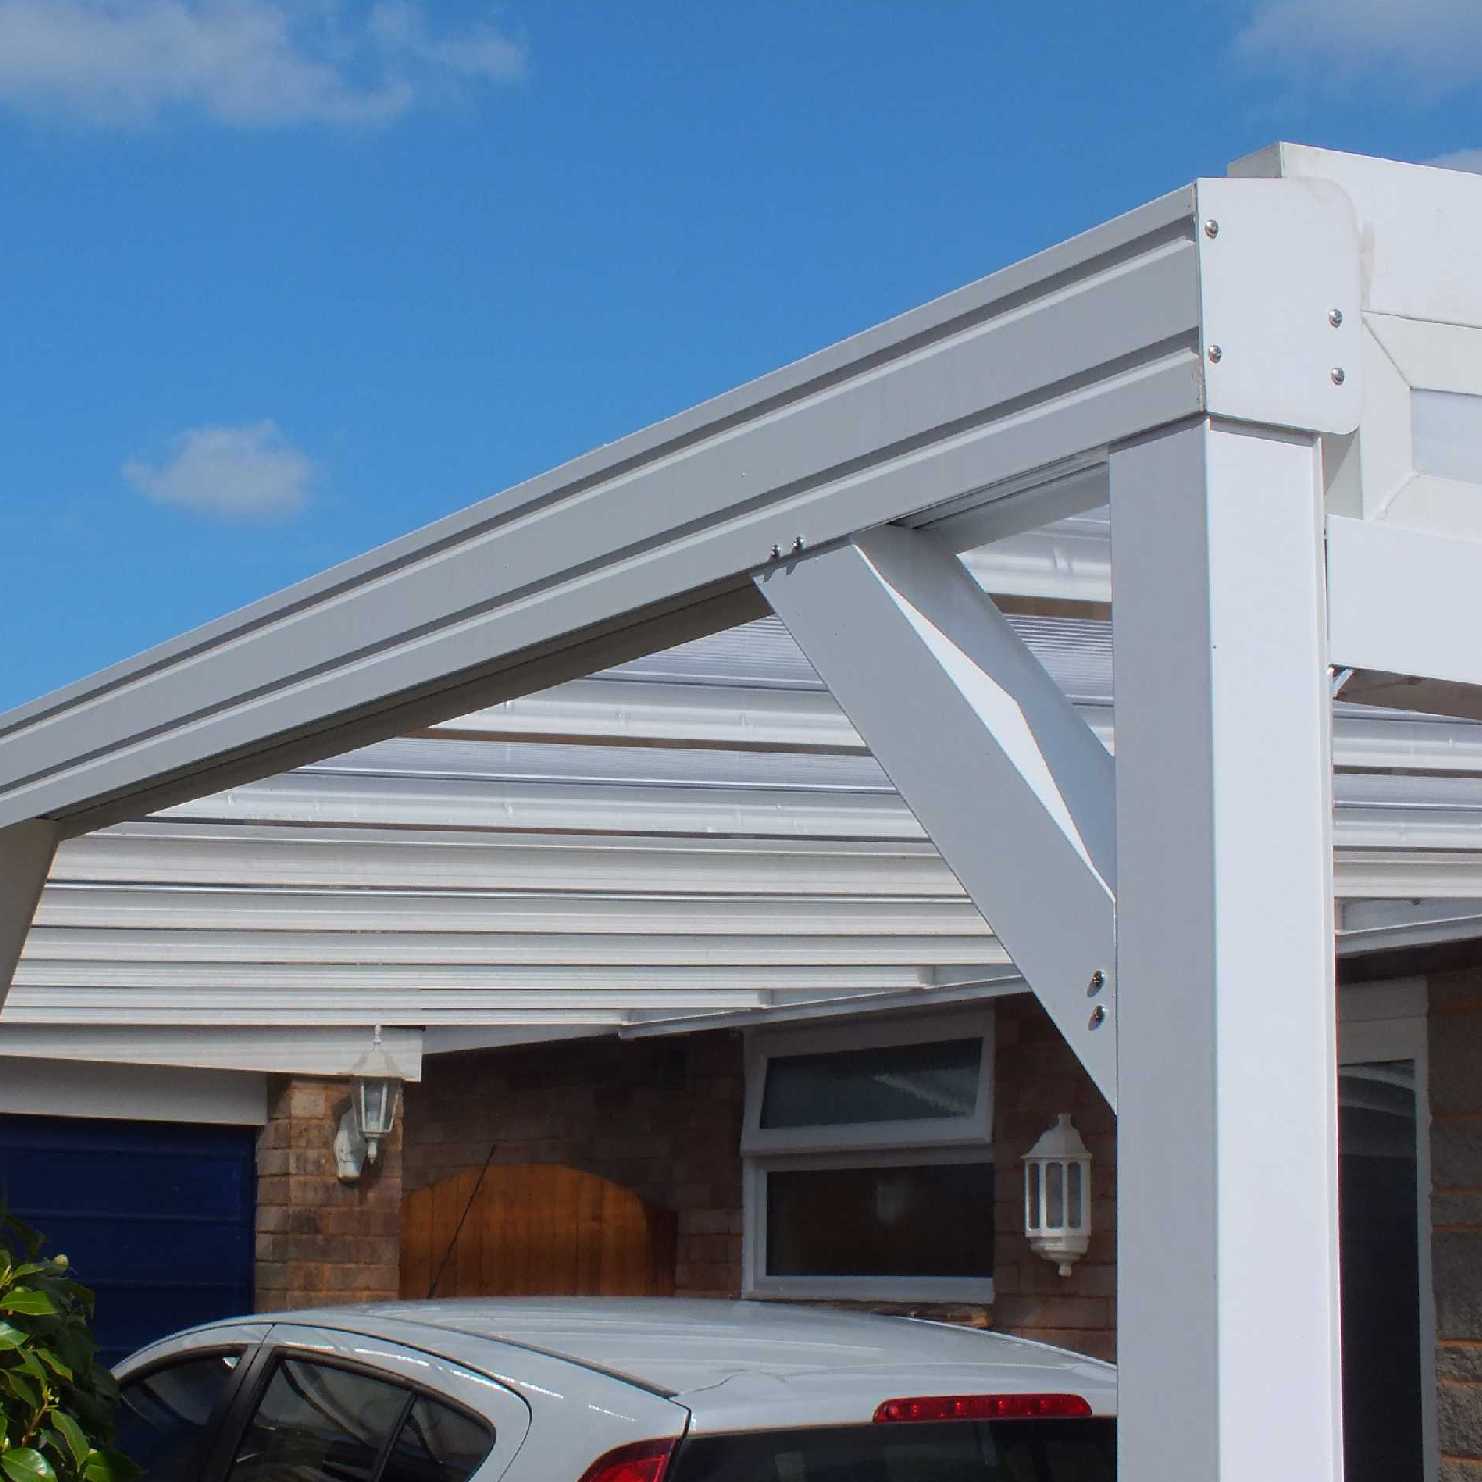 Buy Omega Smart Lean-To Canopy, White with 16mm Polycarbonate Glazing - 5.2m (W) x 2.0m (P), (3) Supporting Posts online today